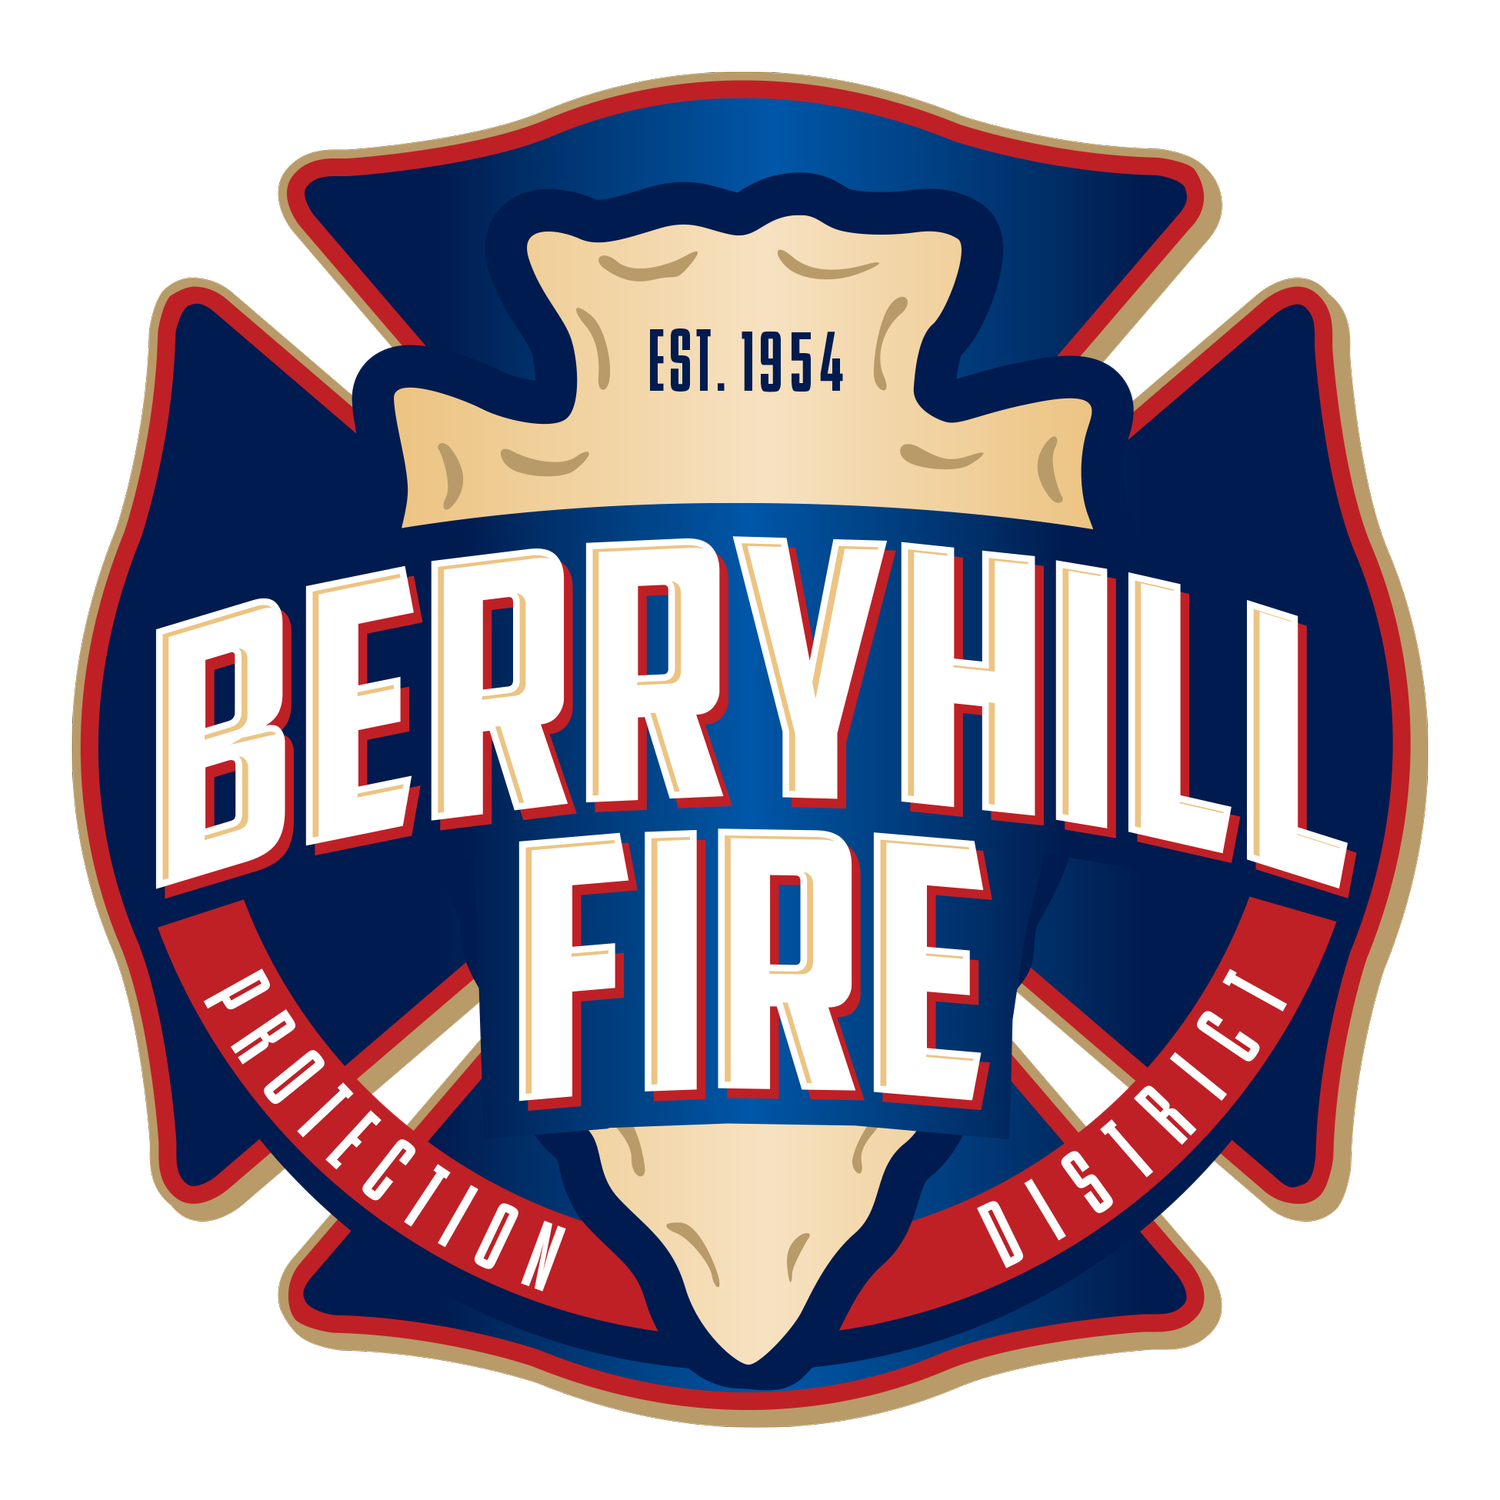 Berryhill Fire Protection District